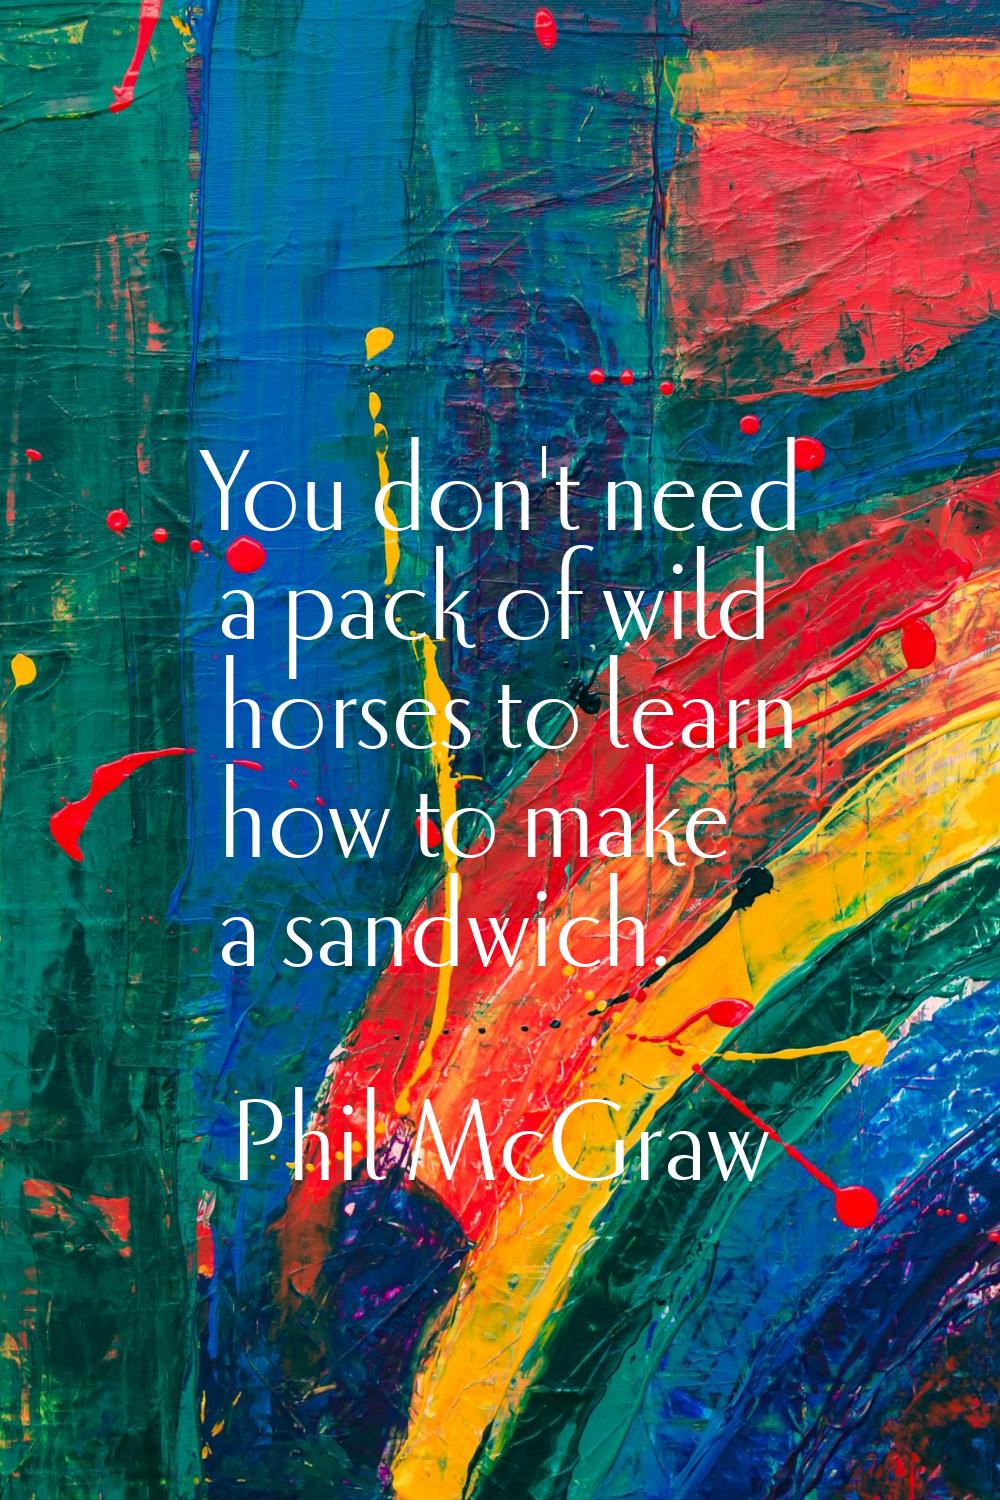 You don't need a pack of wild horses to learn how to make a sandwich.